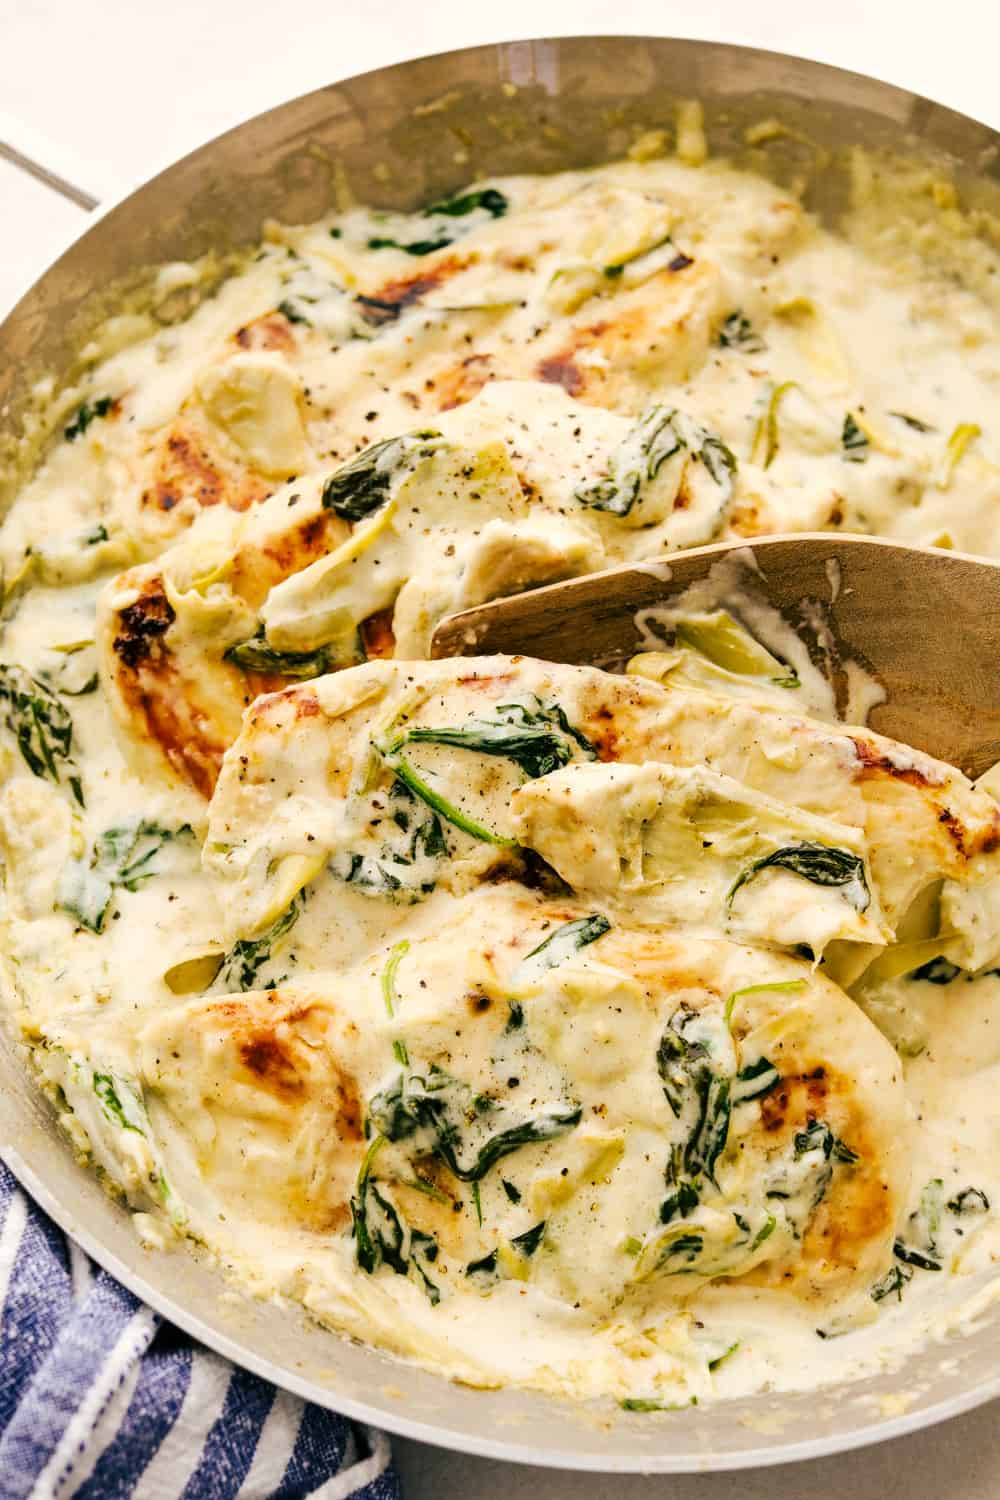 Spooning chicken with spinach artichoke in a creamy sauce.